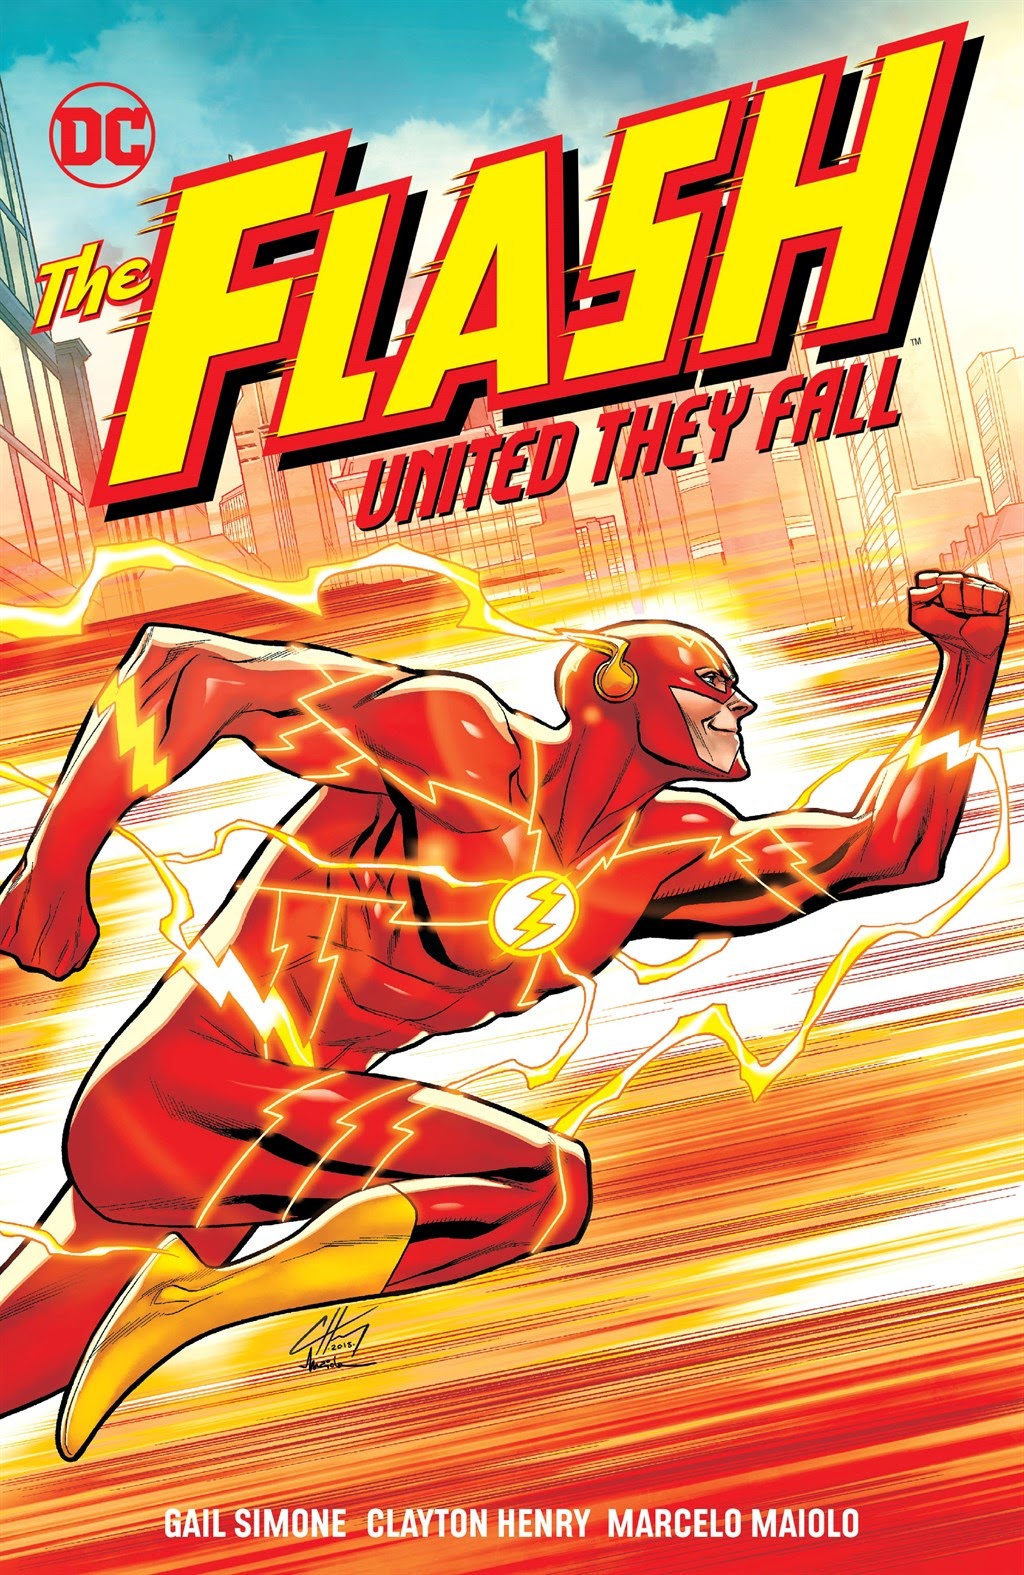 Read online The Flash: United They Fall comic -  Issue # TPB (Part 1) - 1